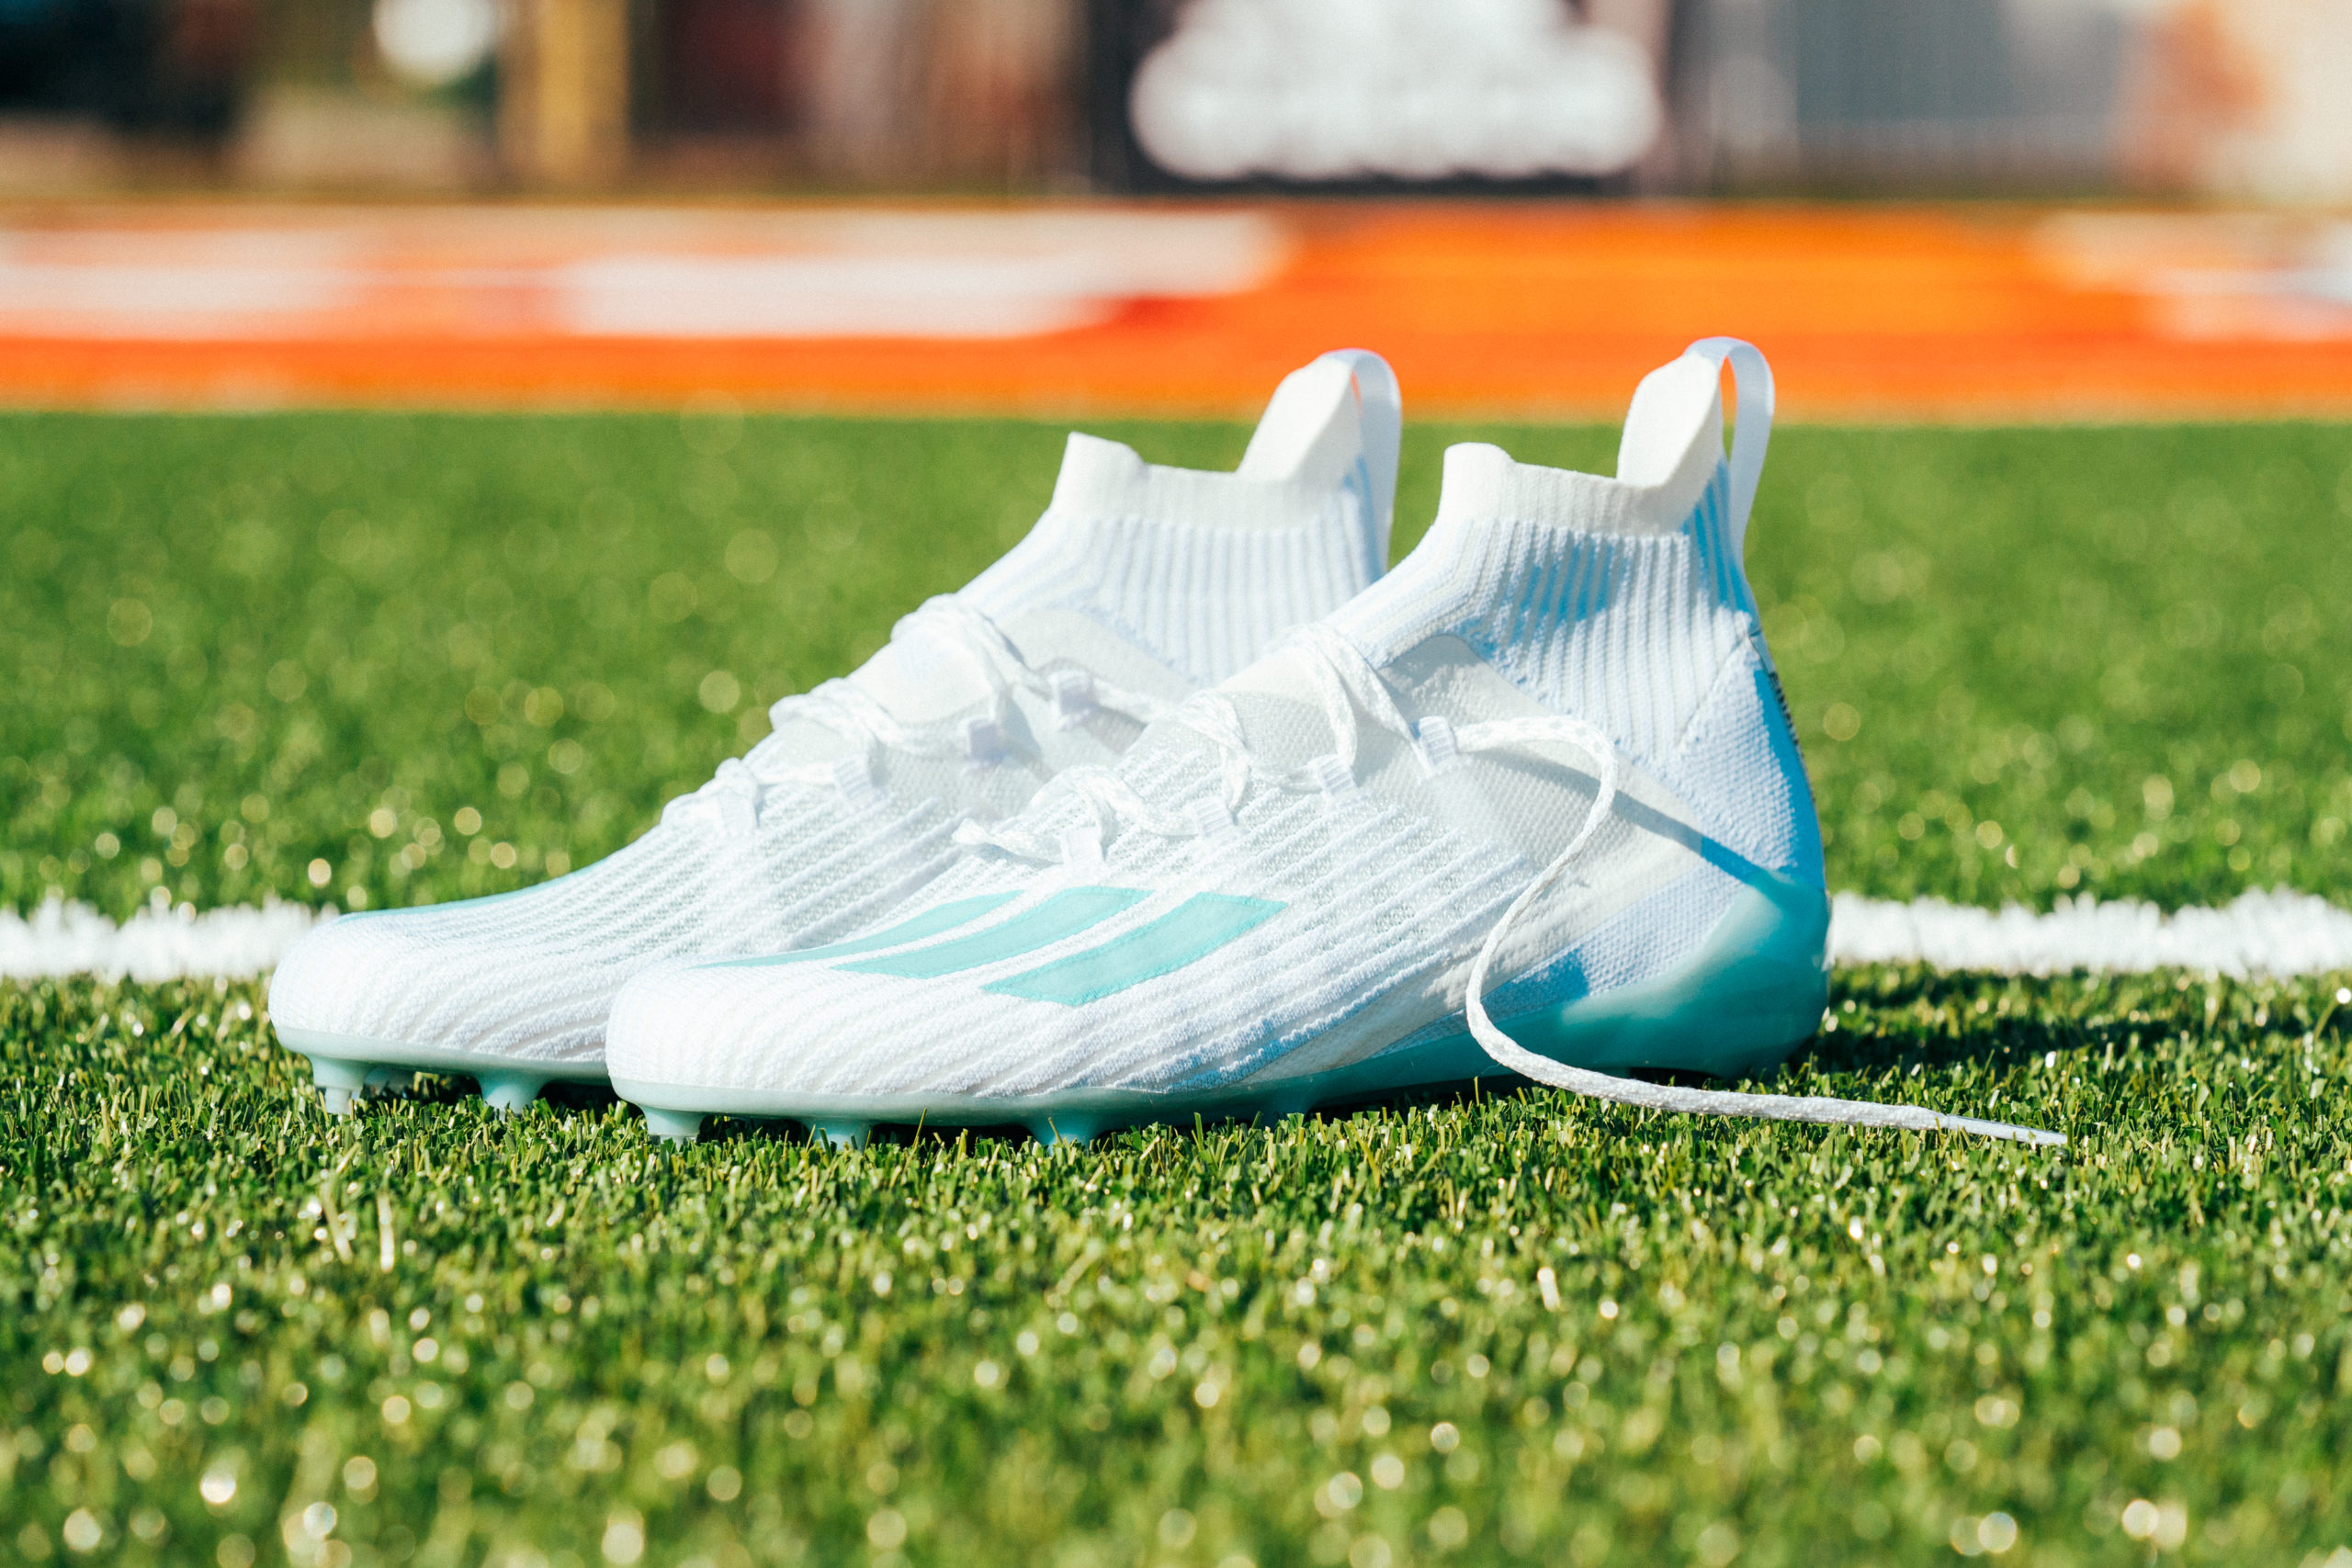 adidas parley cleats